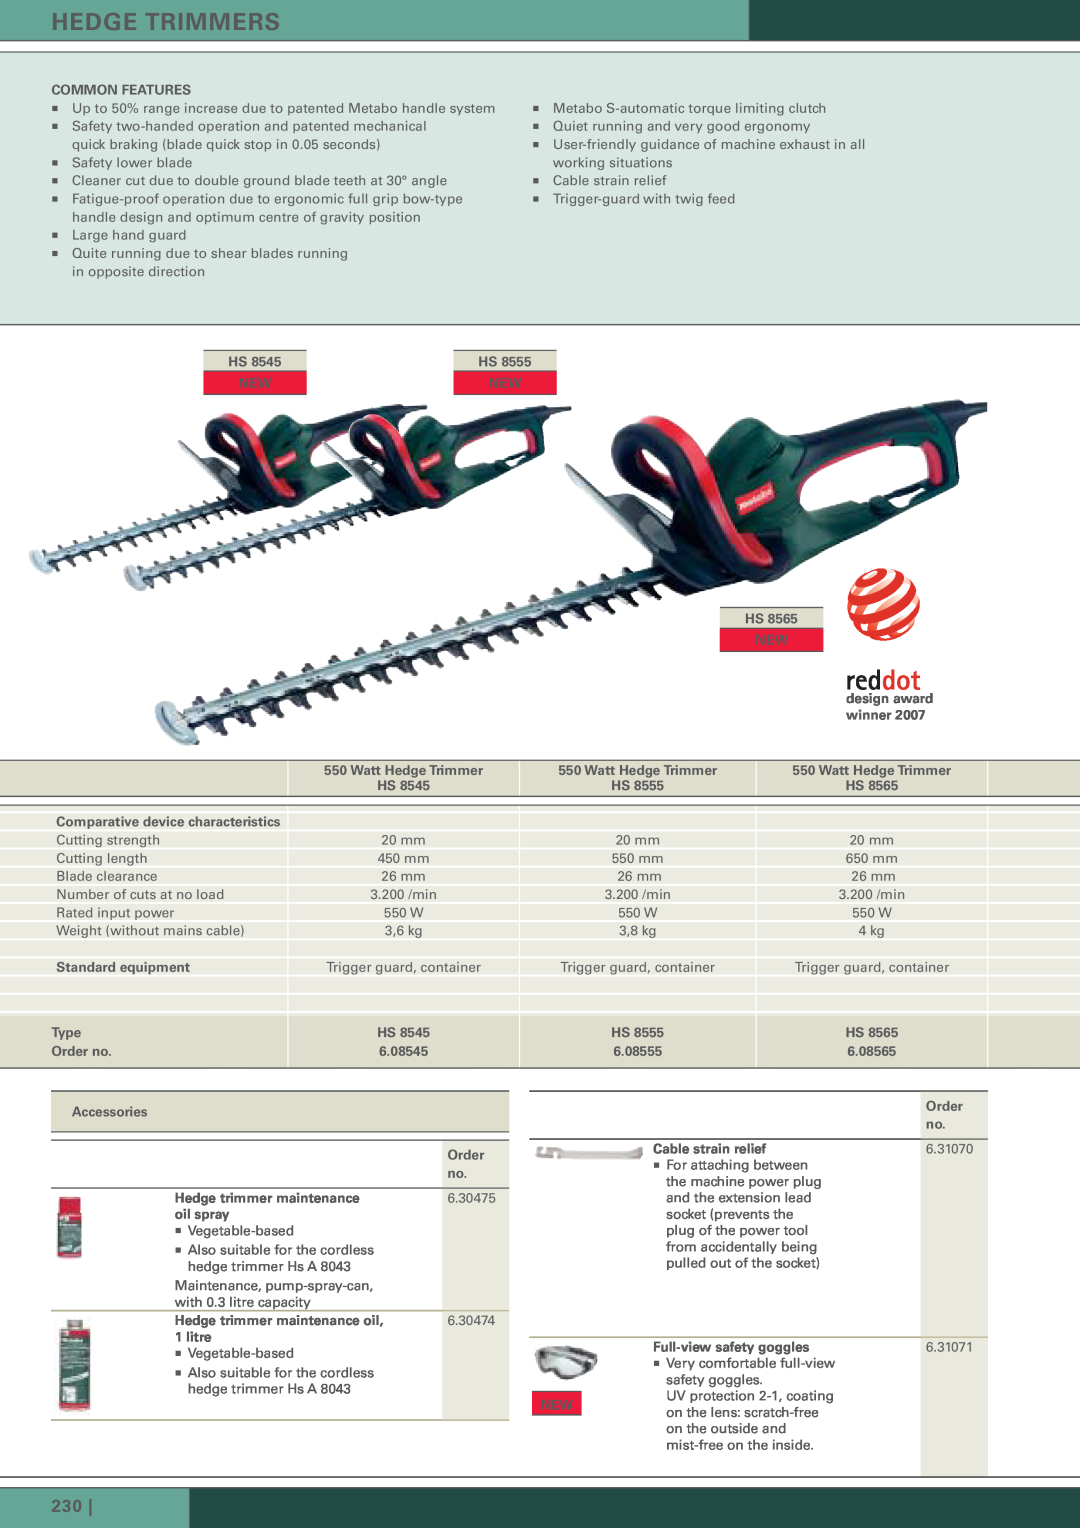 Metabo HS-8665 Quick, HS-8655 Quick, HS-8675 Quick, HS-8555, HS-8565, HS-8545 manual 230, Hedge Trimmers 